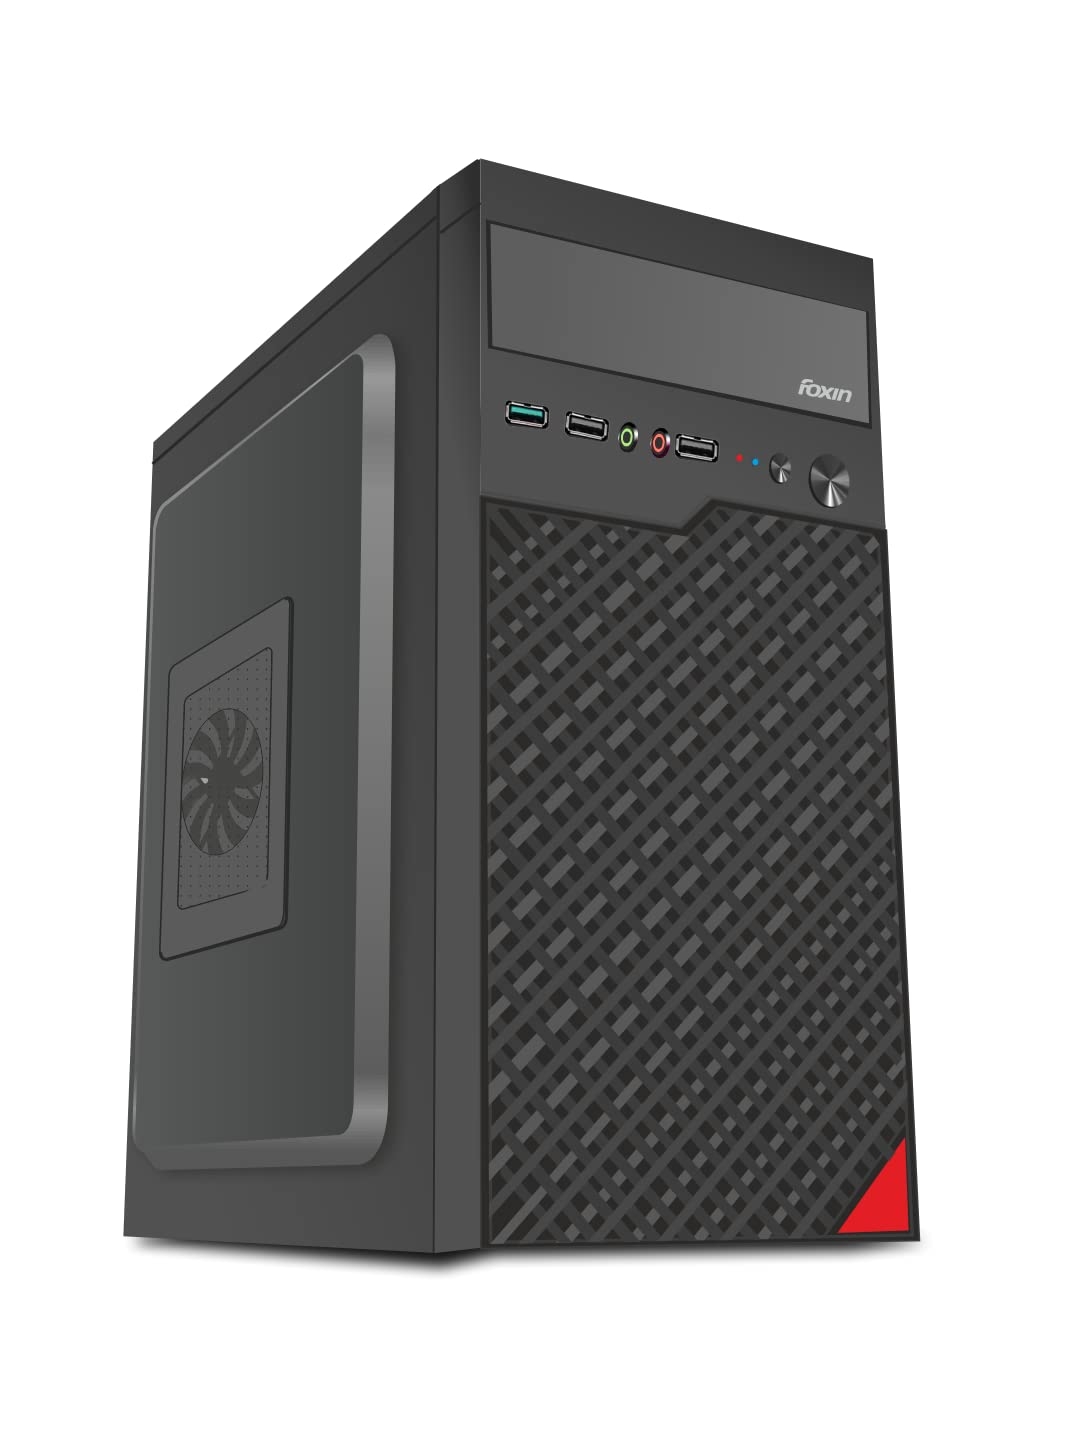 Foxin PACE Desktop Computer Case/PC Cabinet with Steel Metal Body | ATX Motherboard Compatible